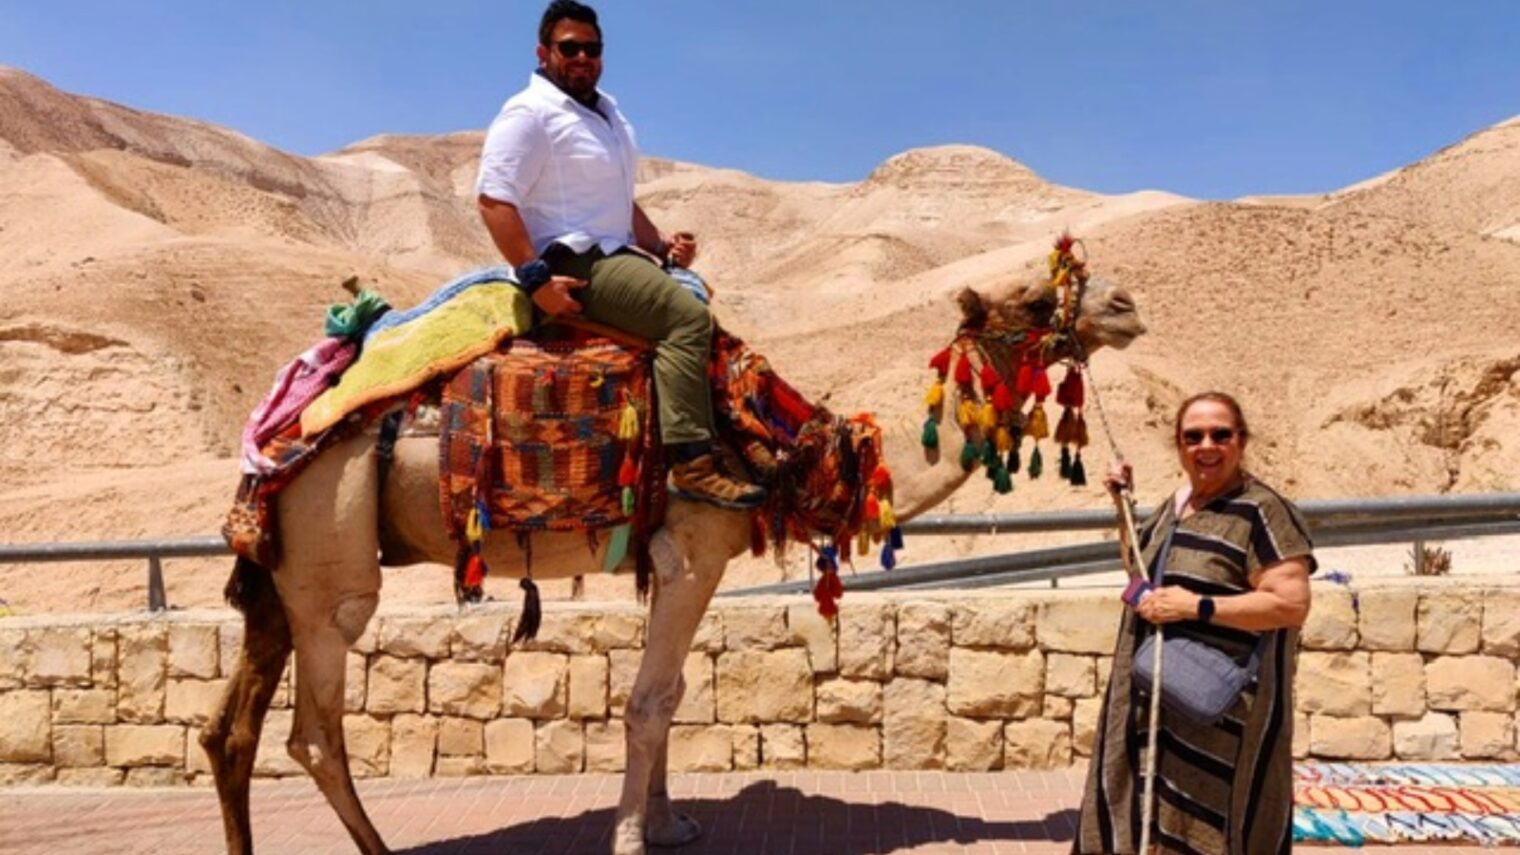 Sharon Richman and her son, Adam, on a camel ride in Israel. Photo: courtesy